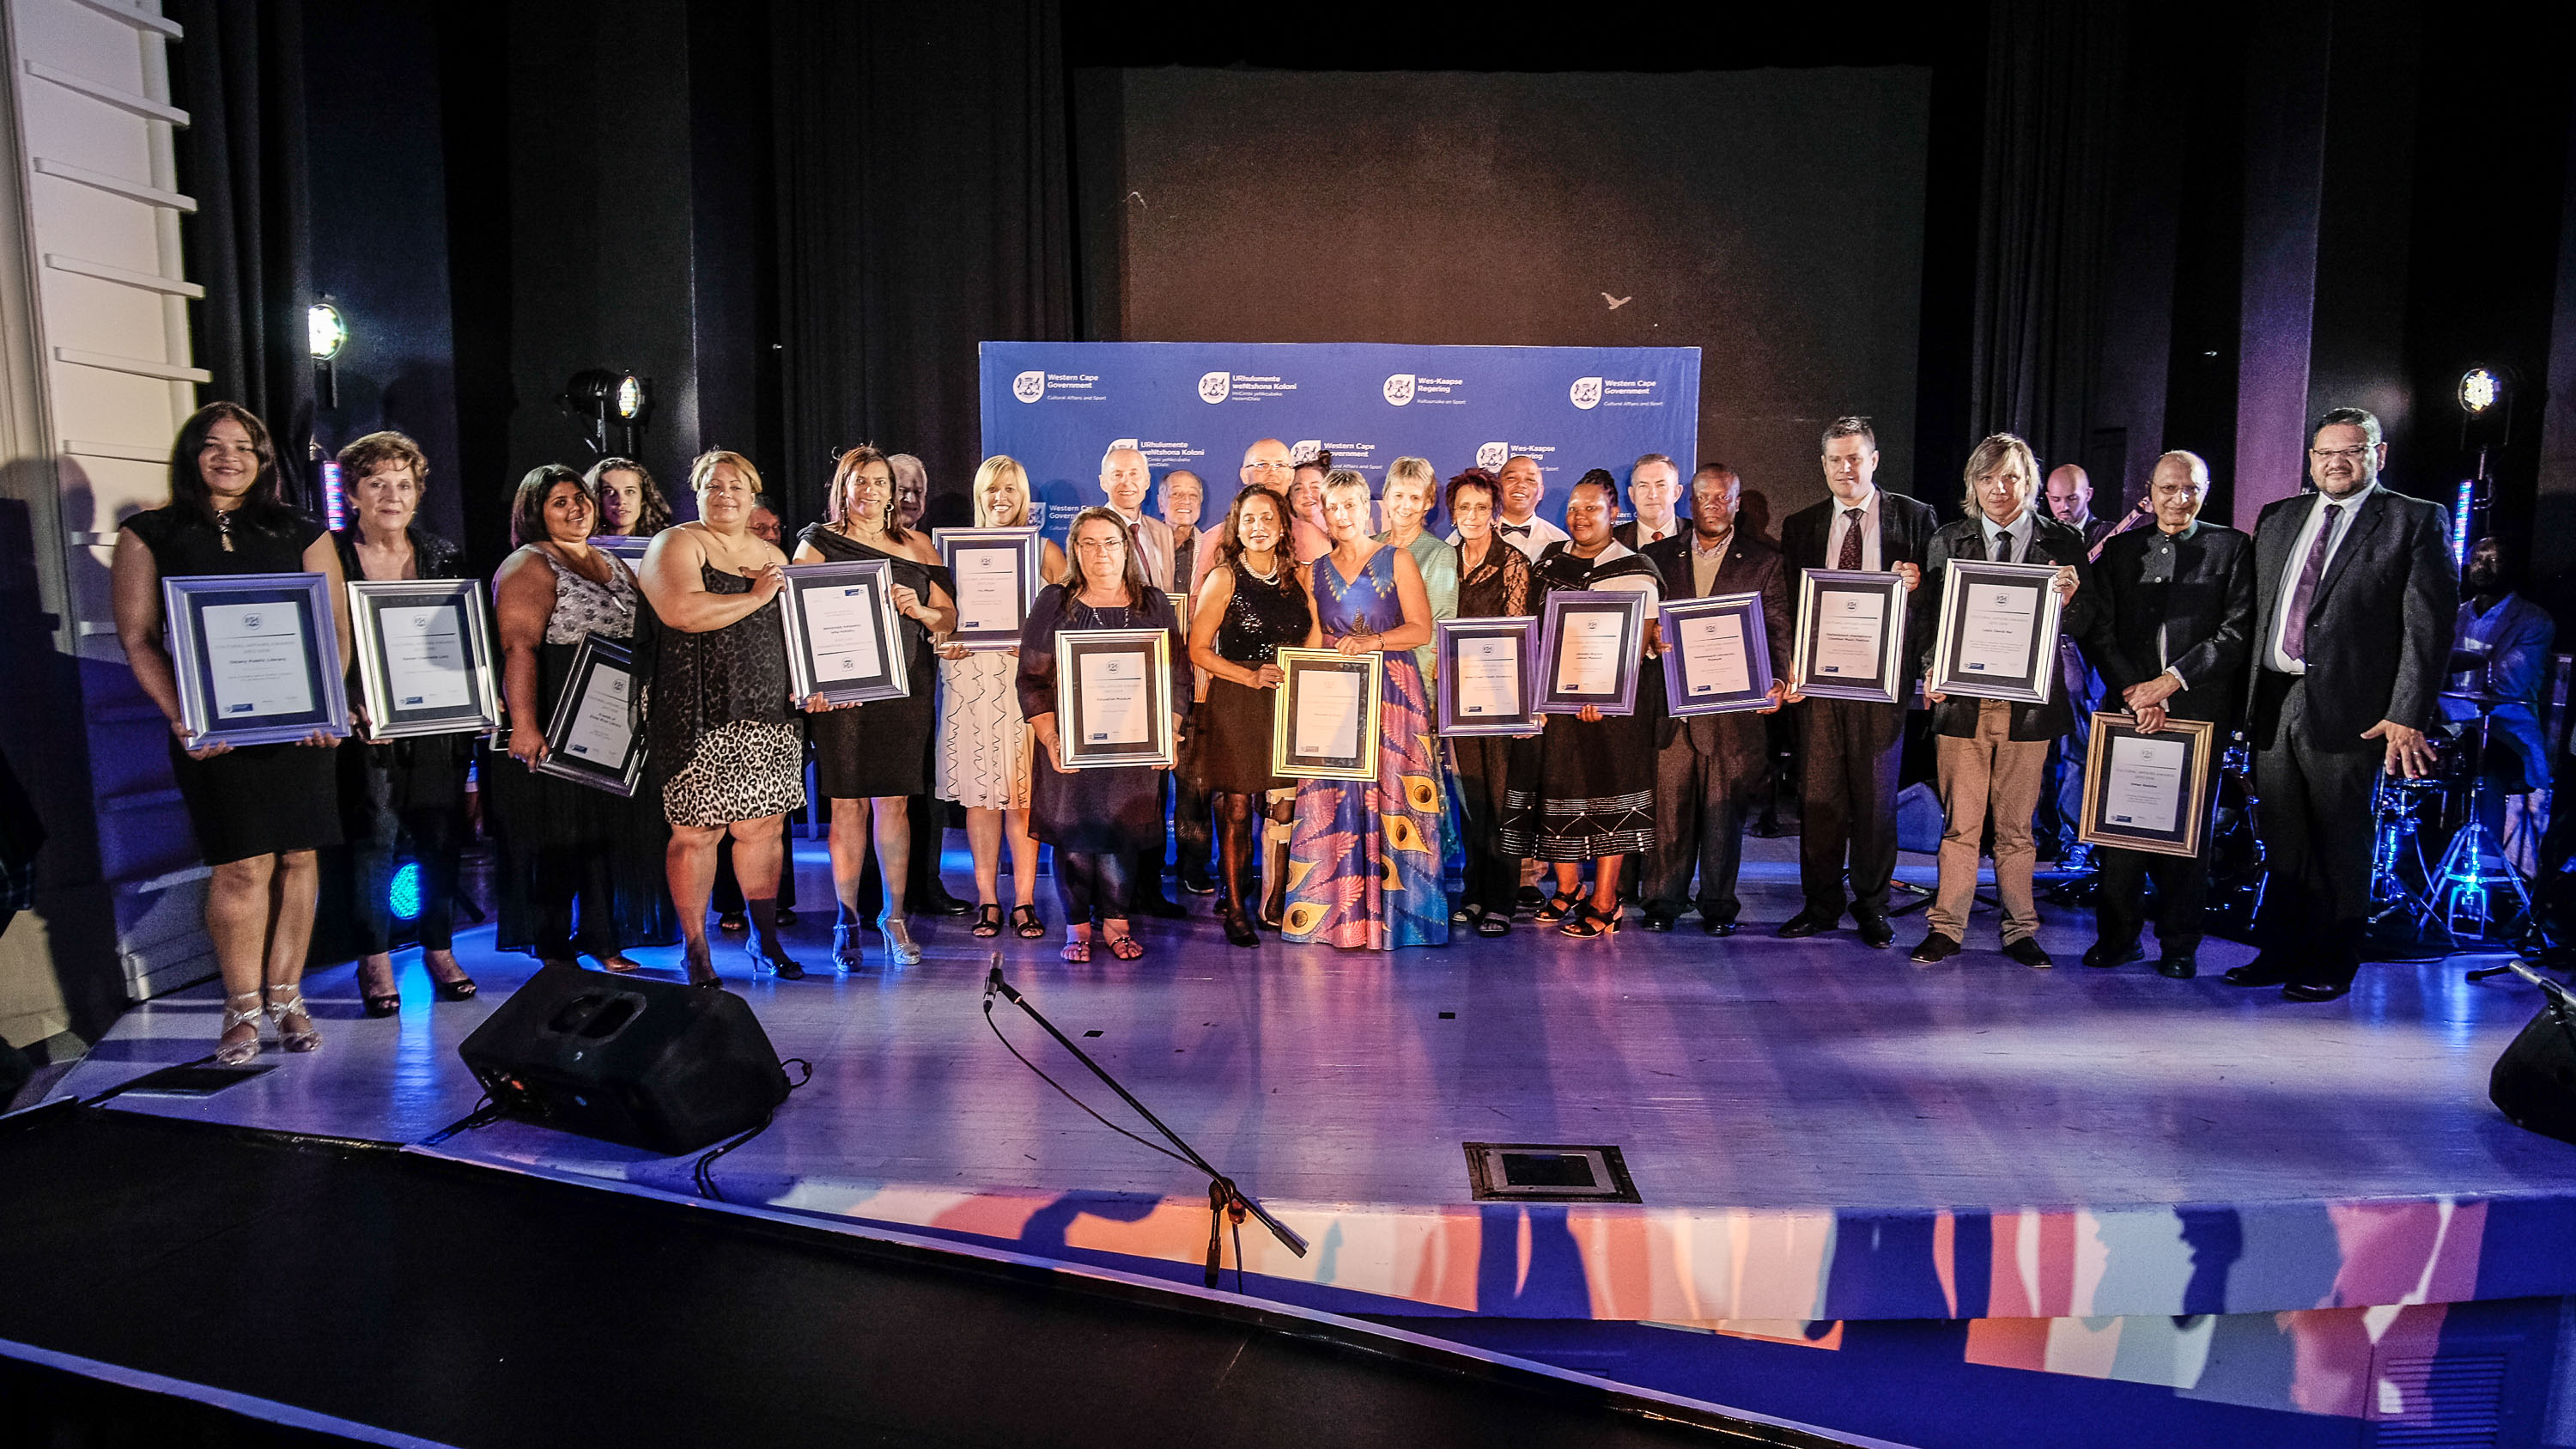 Minister Anroux Marais and HOD Brent Walters with some of the winners of the Cultural Affairs Awards 2017/18